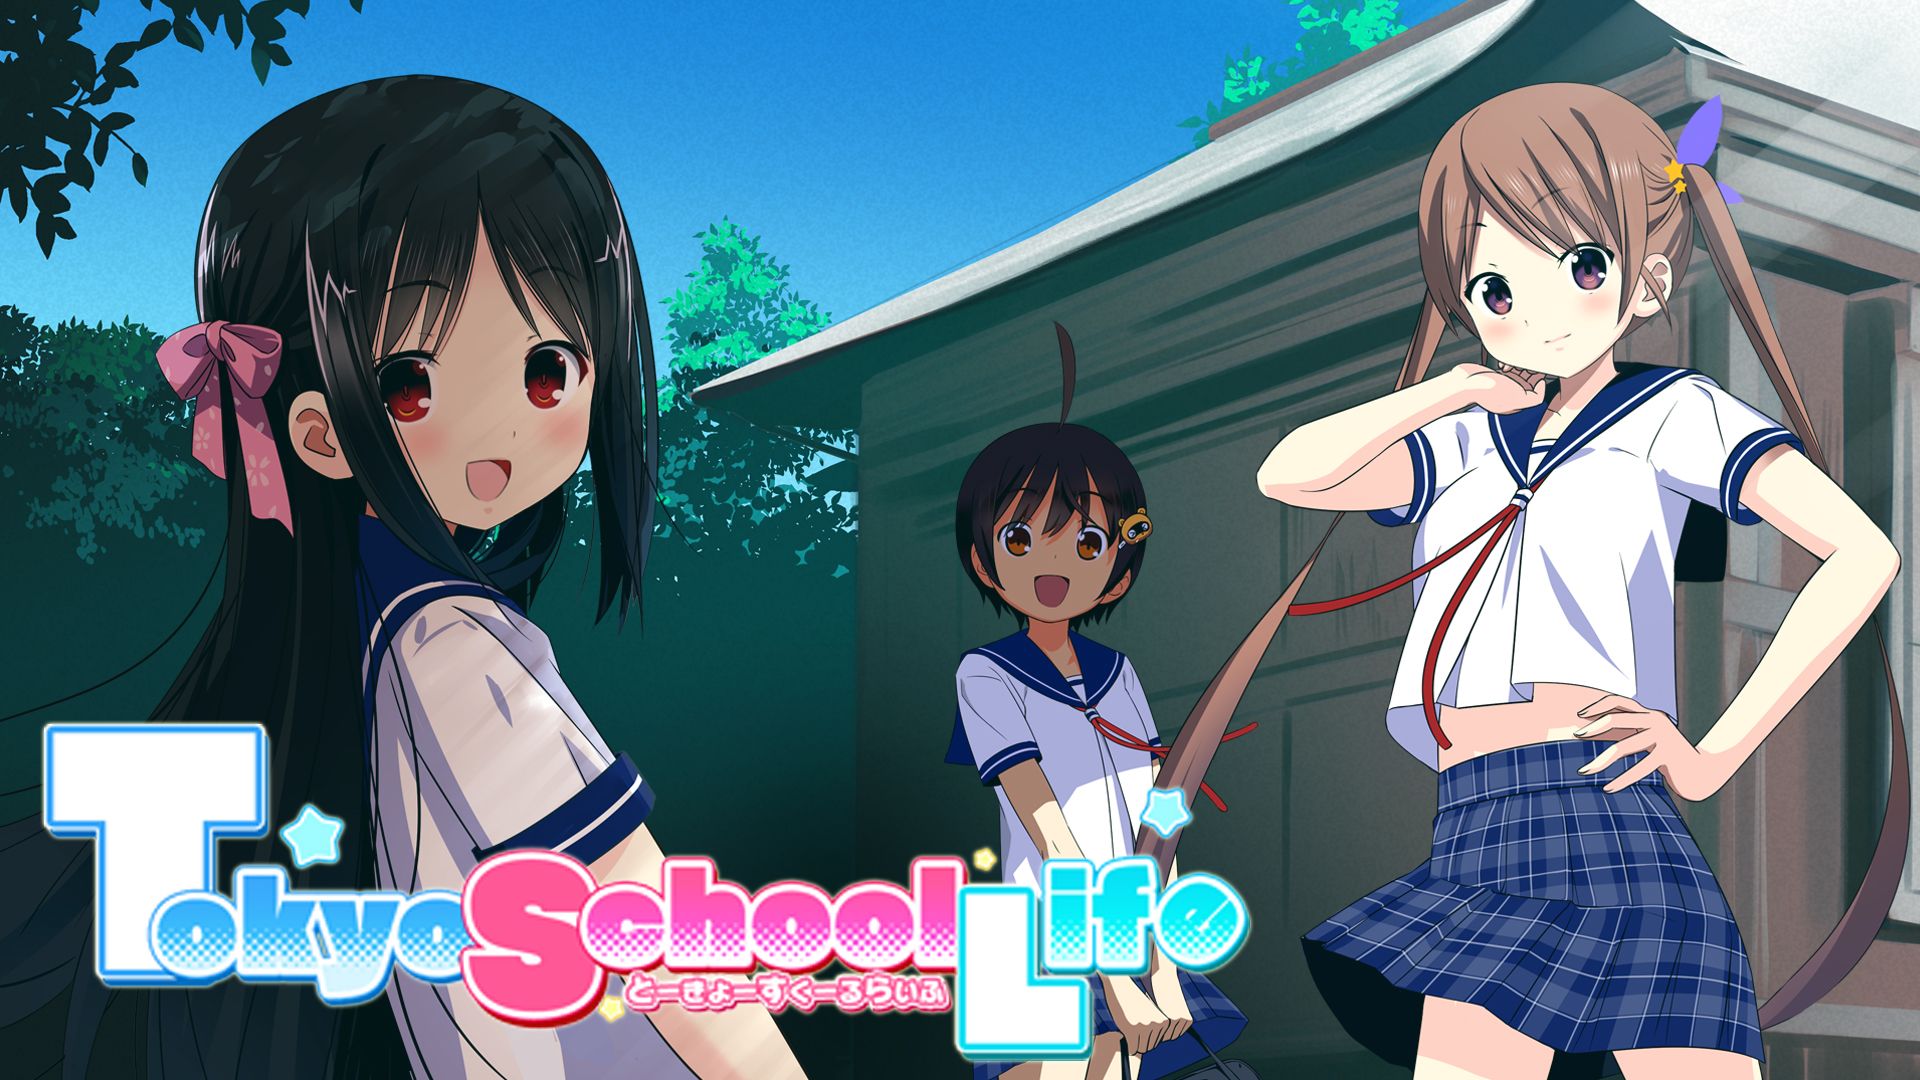 Tokyo School Life for Nintendo Switch Game Details